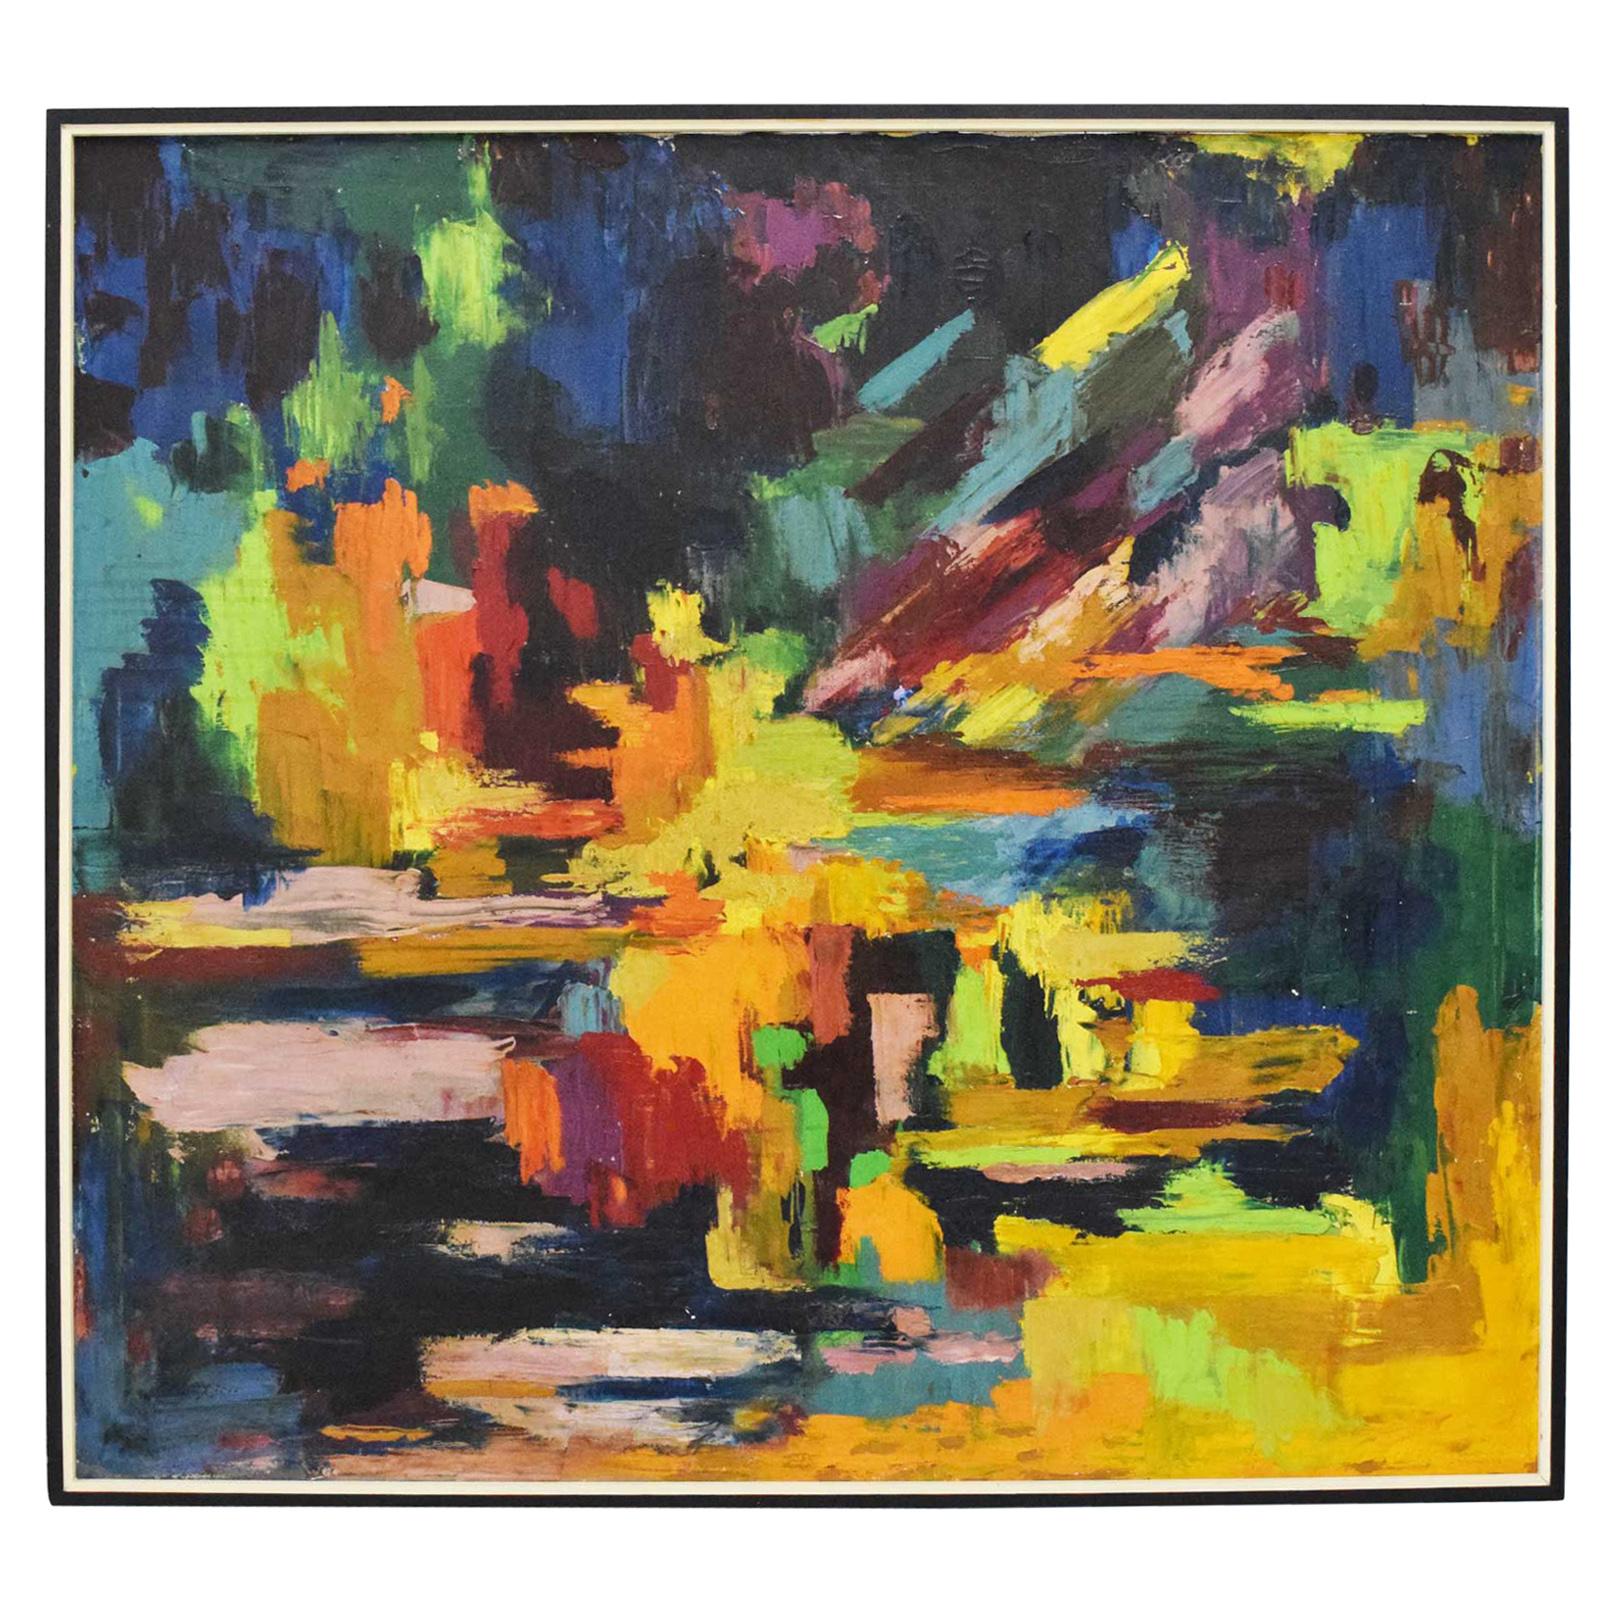 Mid-Century Modern Oil on Canvas in Vibrant Blues, Yellow, Greens, Dated 1967